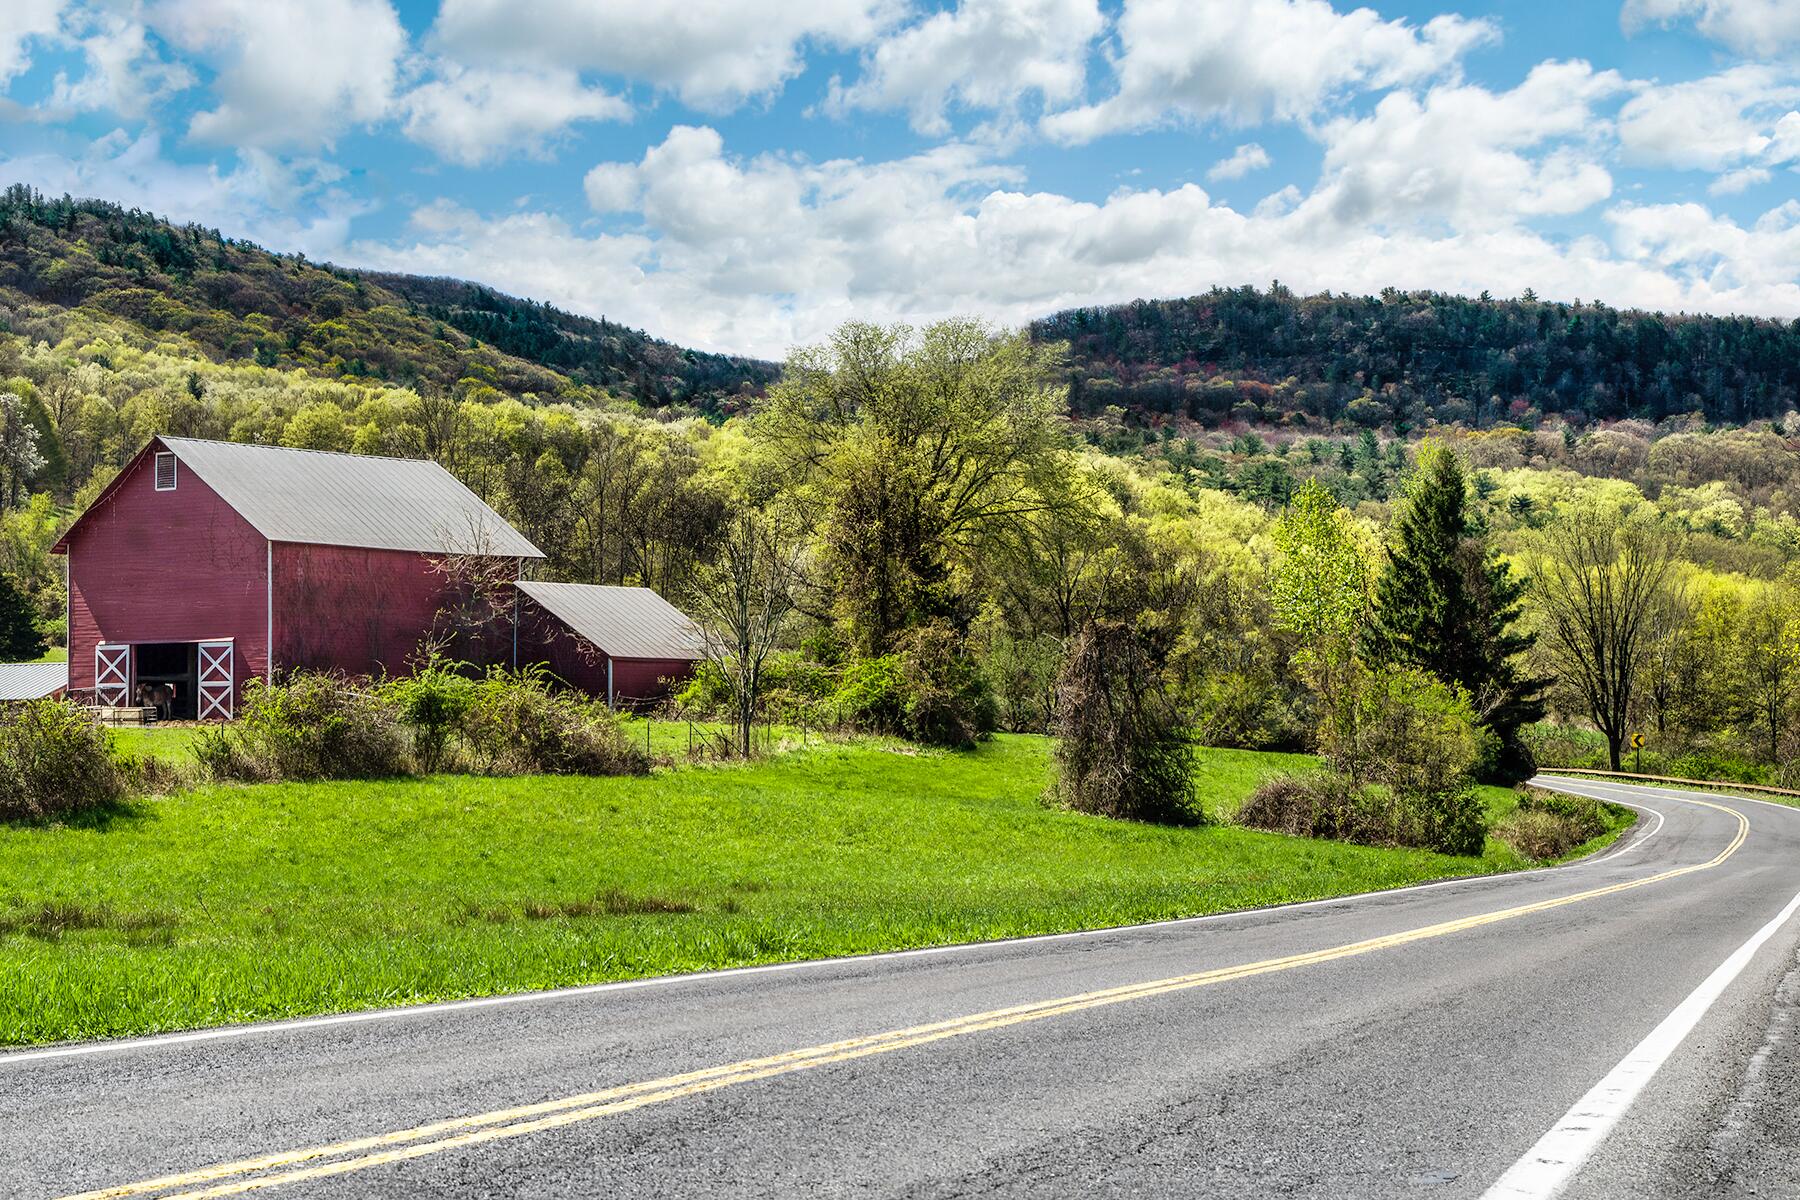 The Perfect 3 Day Weekend Road Trip Itinerary To The Catskills New York